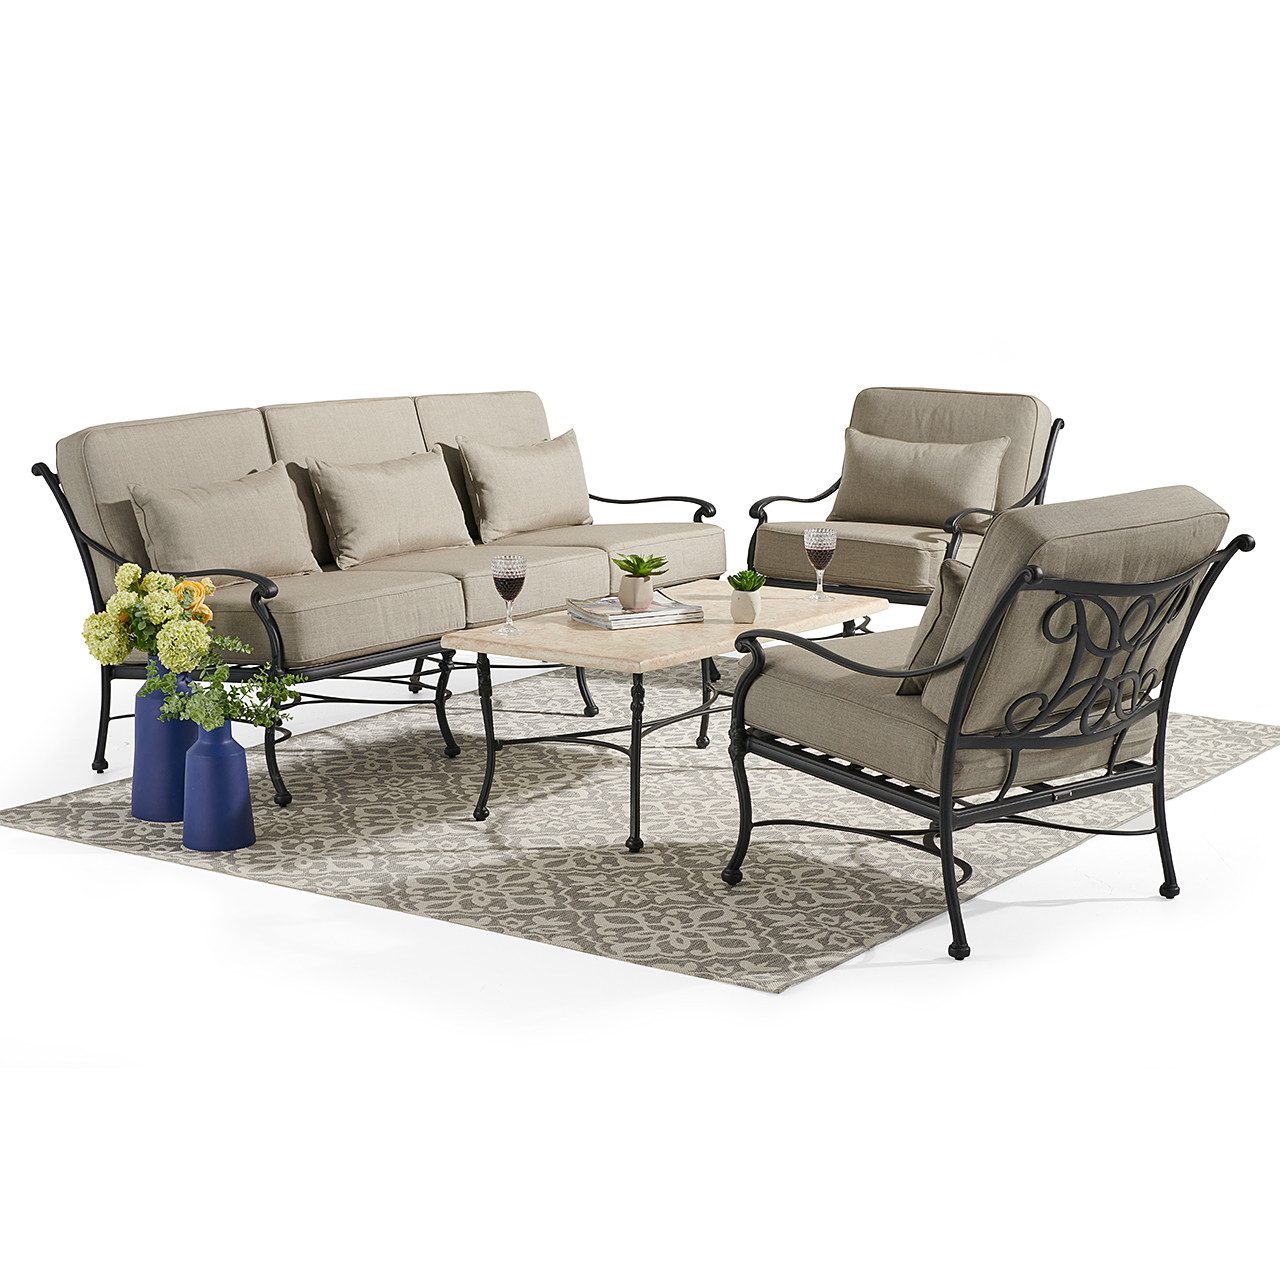 Chateau Rust Cast Aluminum with Cushions 4 Pc. Sofa Group + Club Chairs + 44 x 24 in. Marble Top Coffee Table